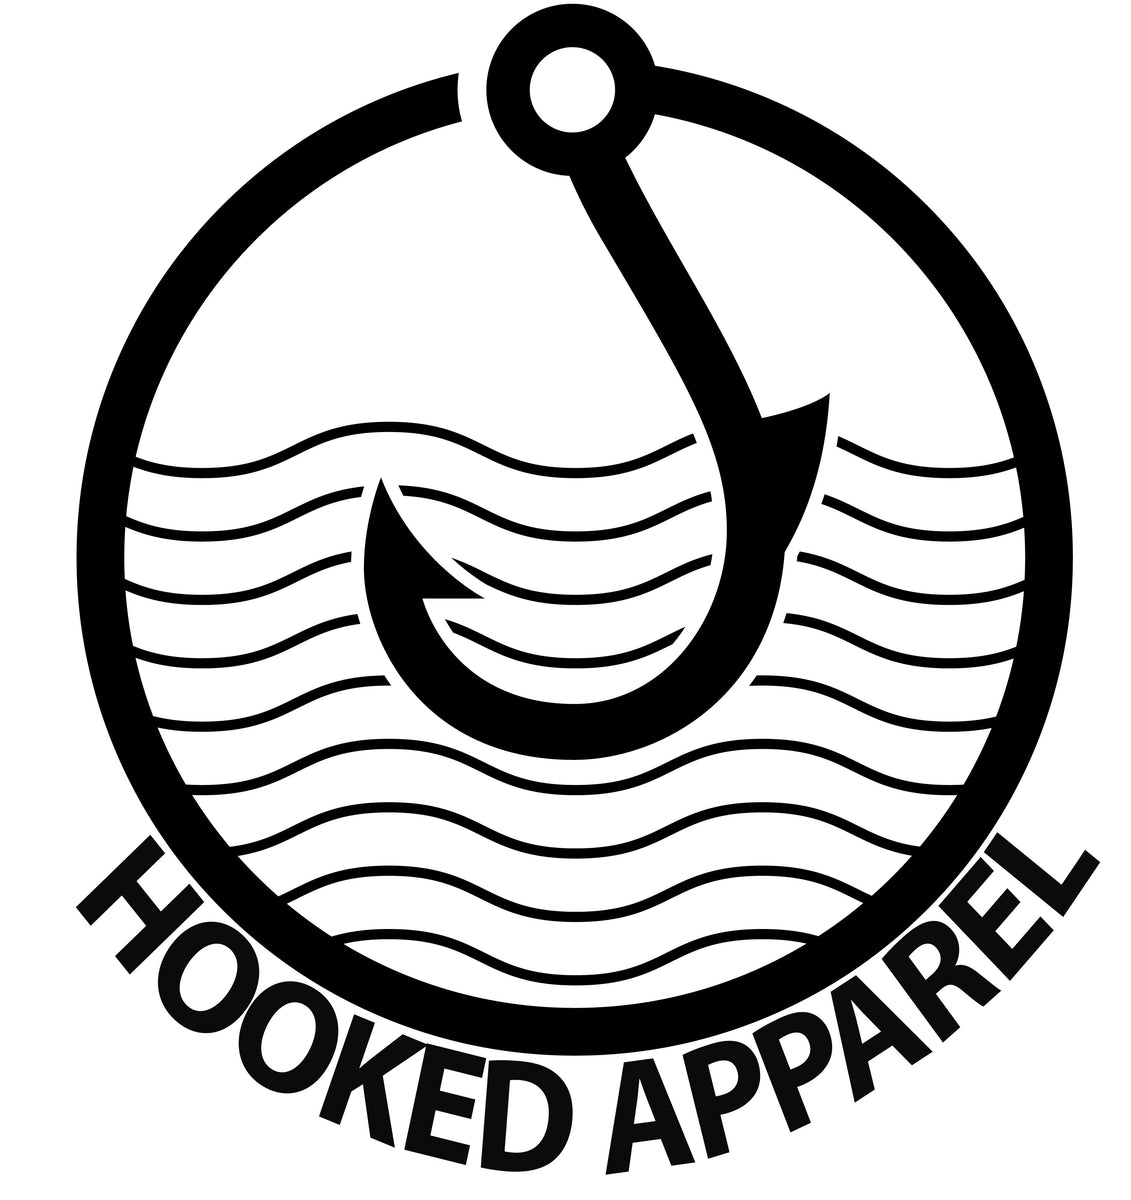 HOOKED APPAREL – Hooked Apparel